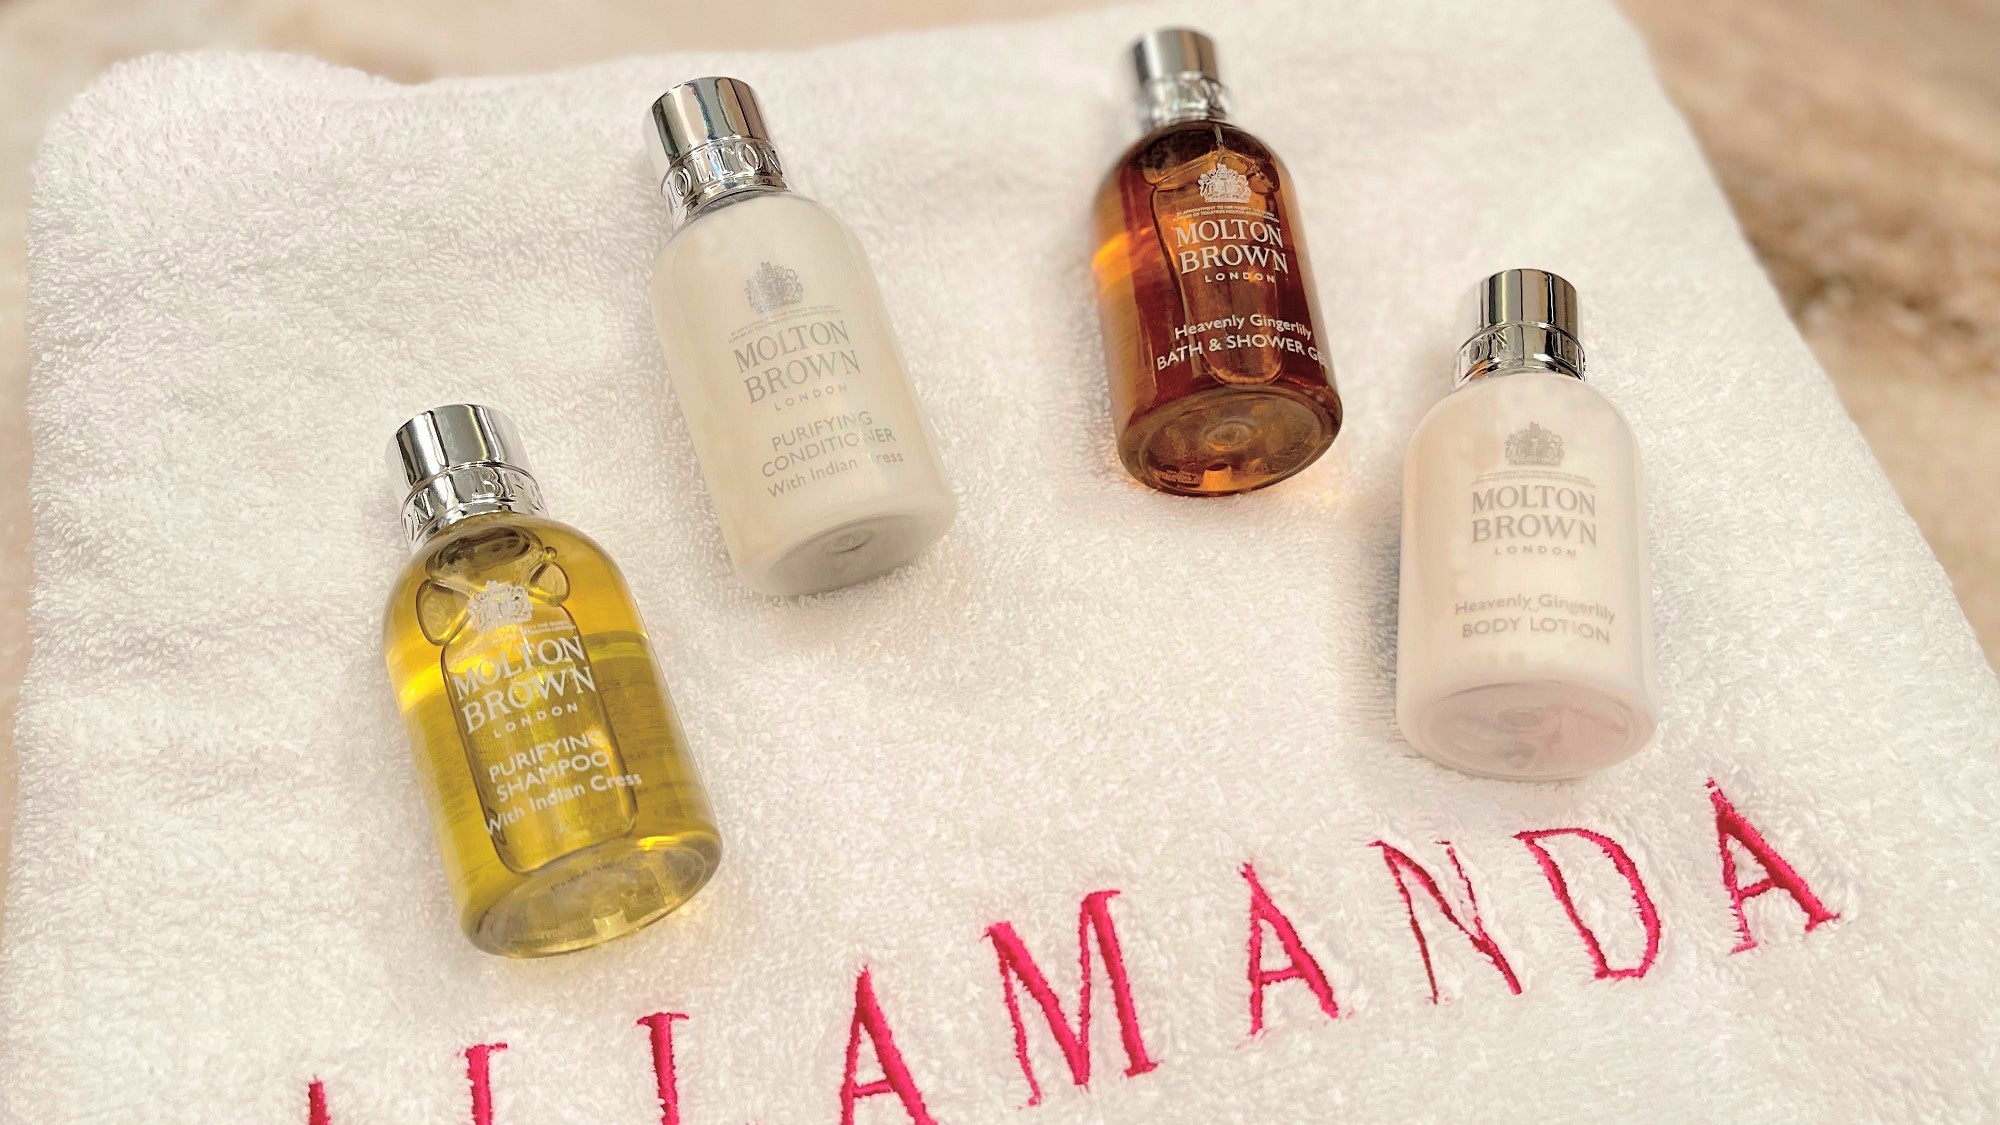 ◆Standard room bathroom amenities are from the British brand Molton Brown.